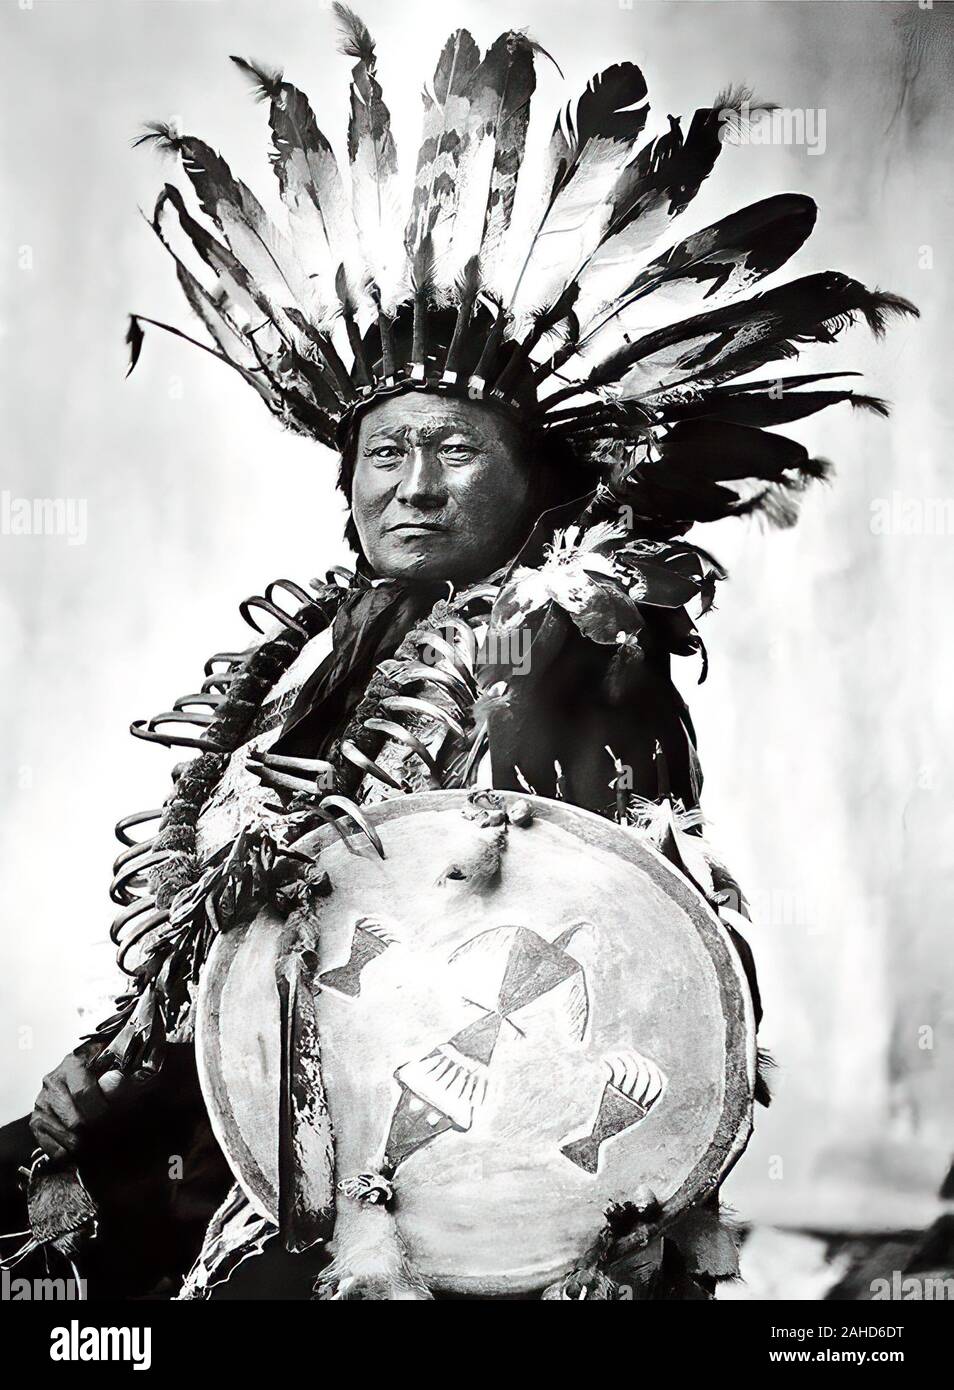 Rain in the Face, a Standing Rock Sioux Chief, in North Dakota circa 1910. He fought with Sitting Bull at Little Bighorn in 1876. Photo by Frank Bennett Fiske Stock Photo